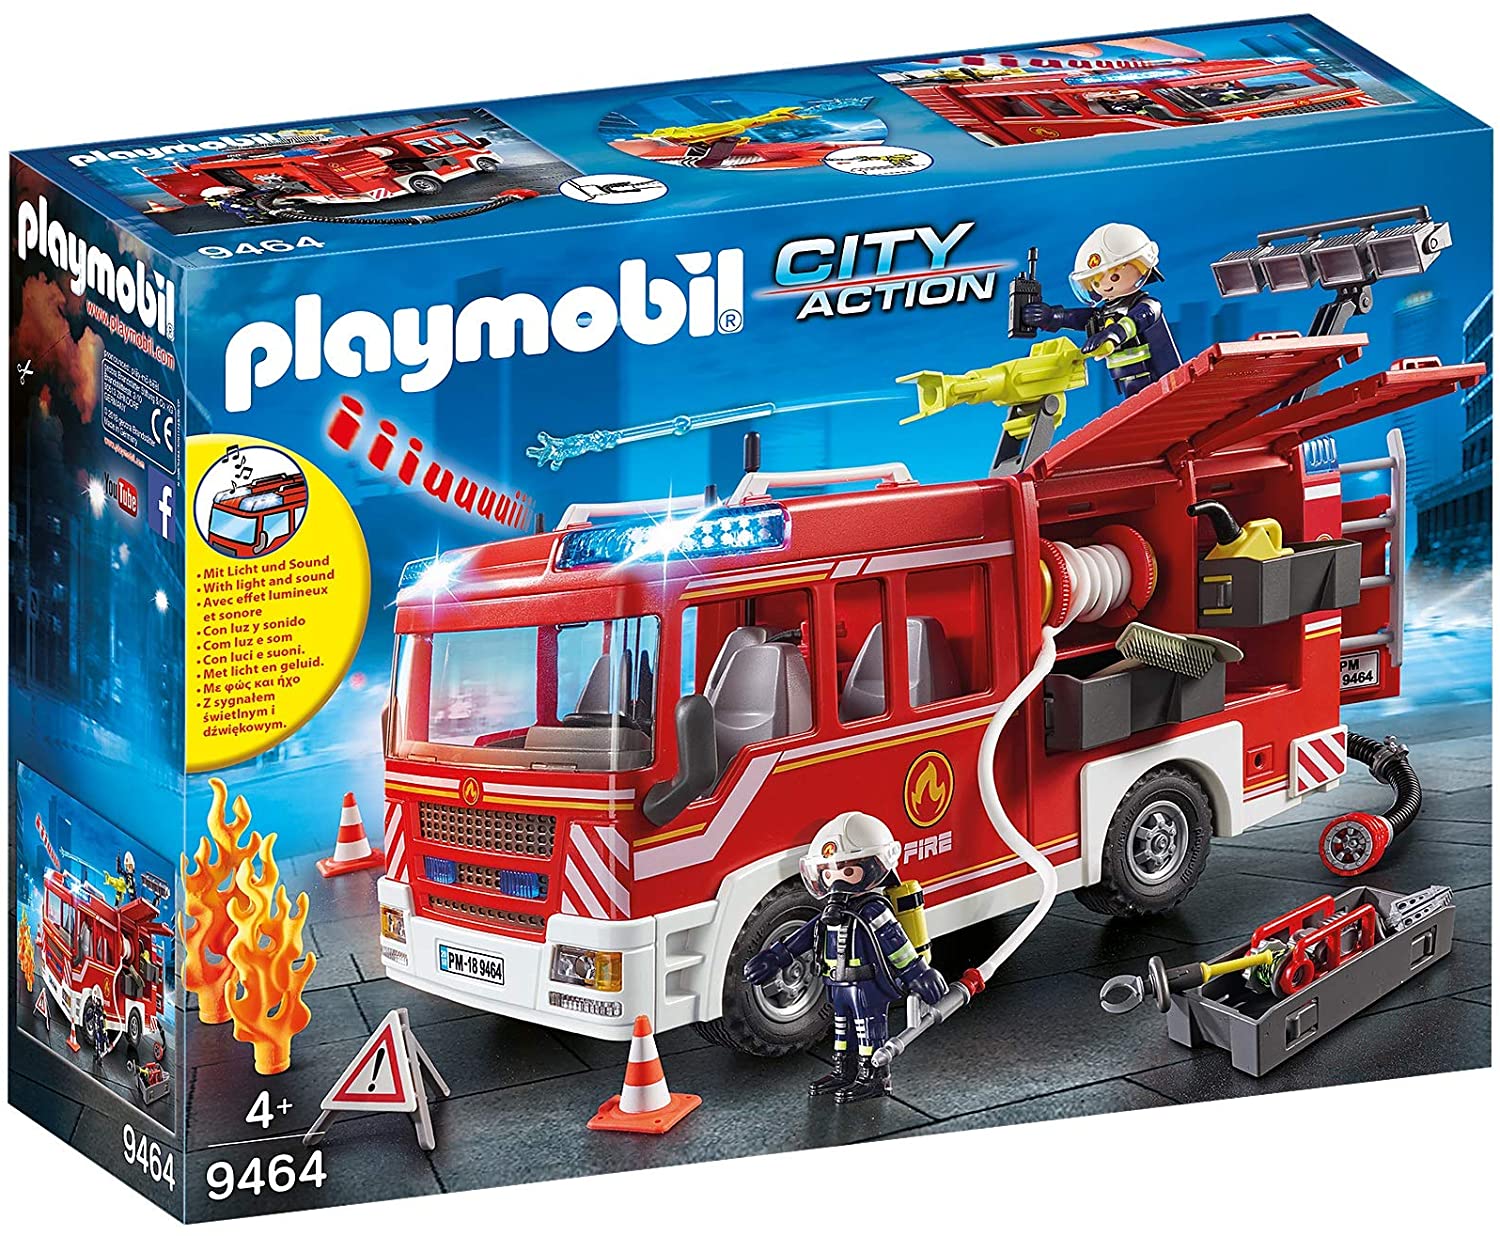 Playmobil 9464 Toy Fire Engine